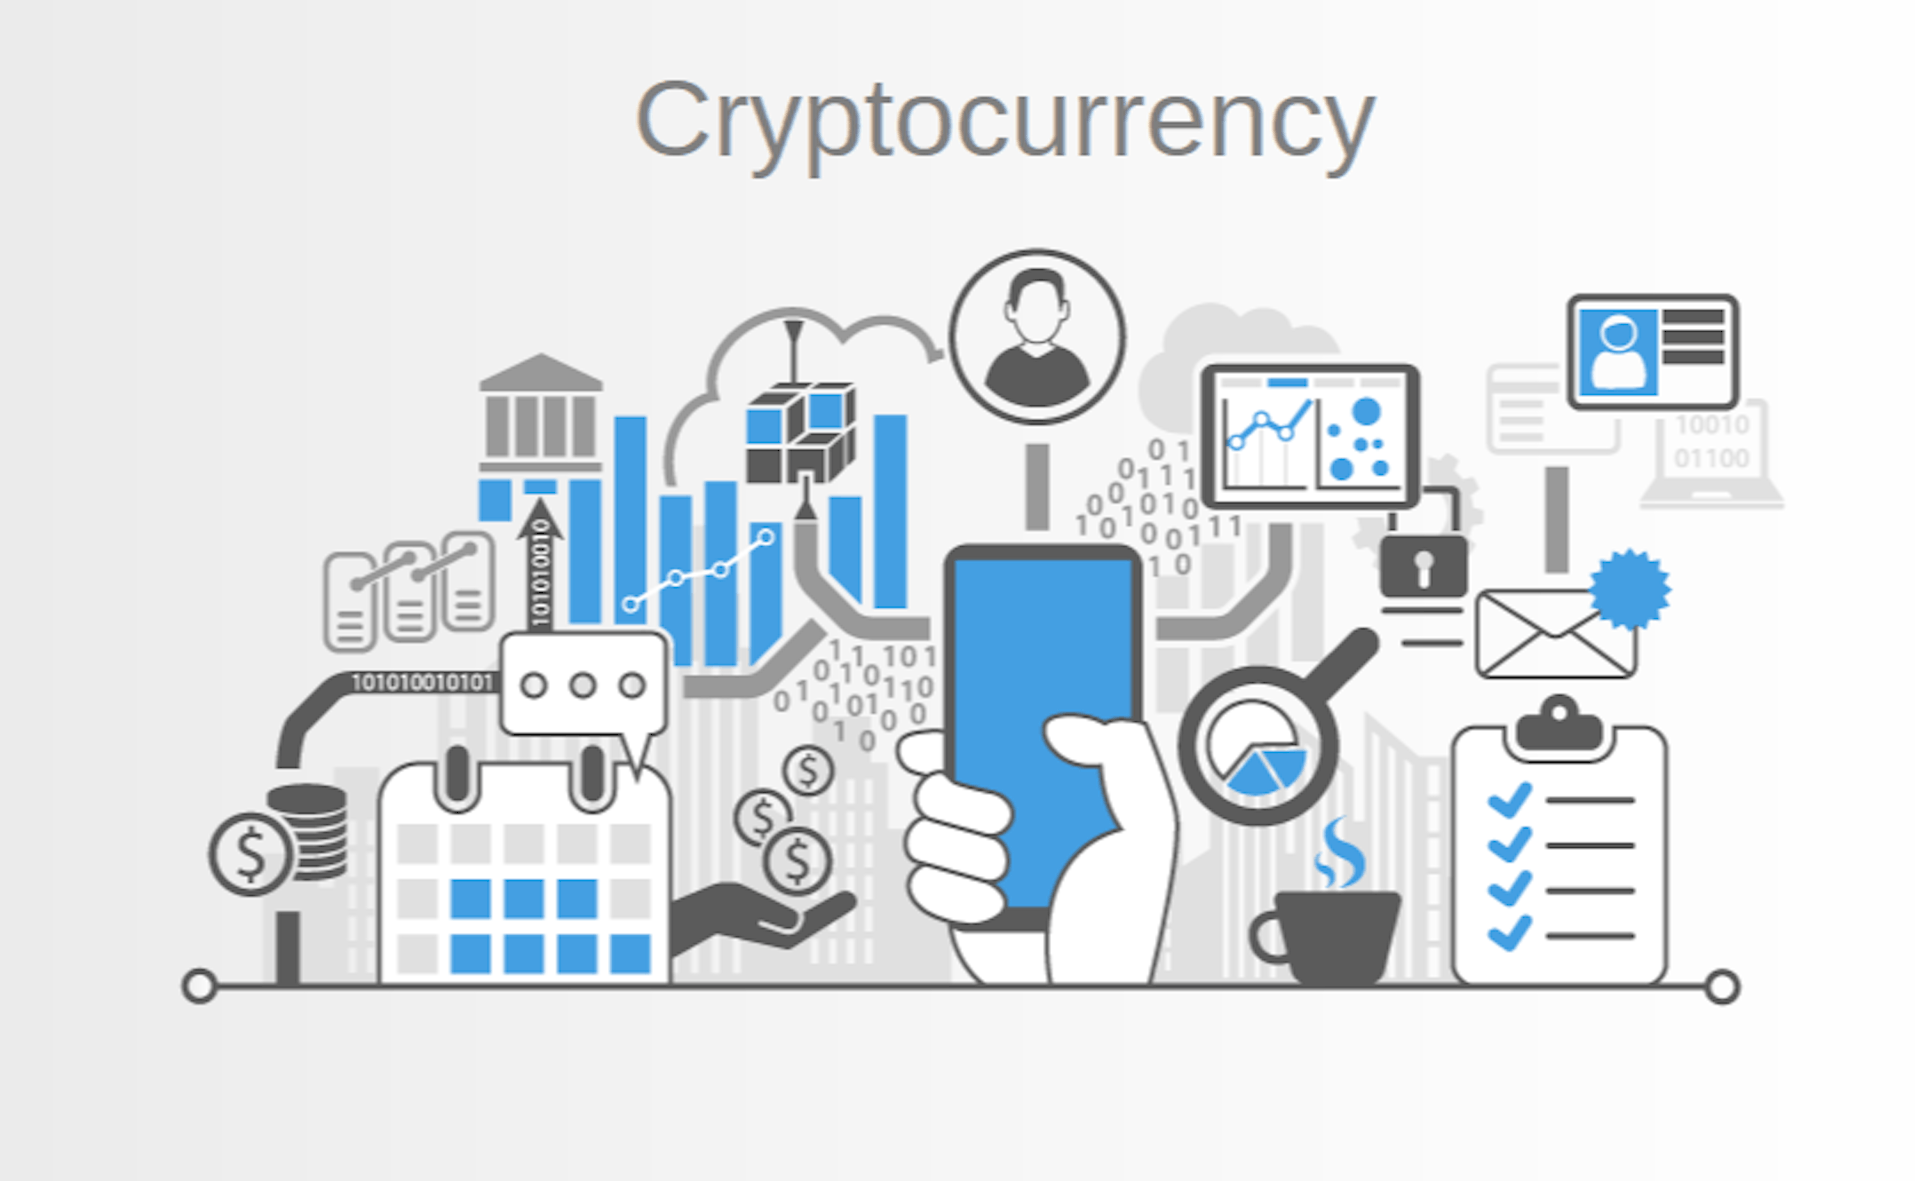 featured image - A cryptocurrency implementation in less than 1500 lines of code